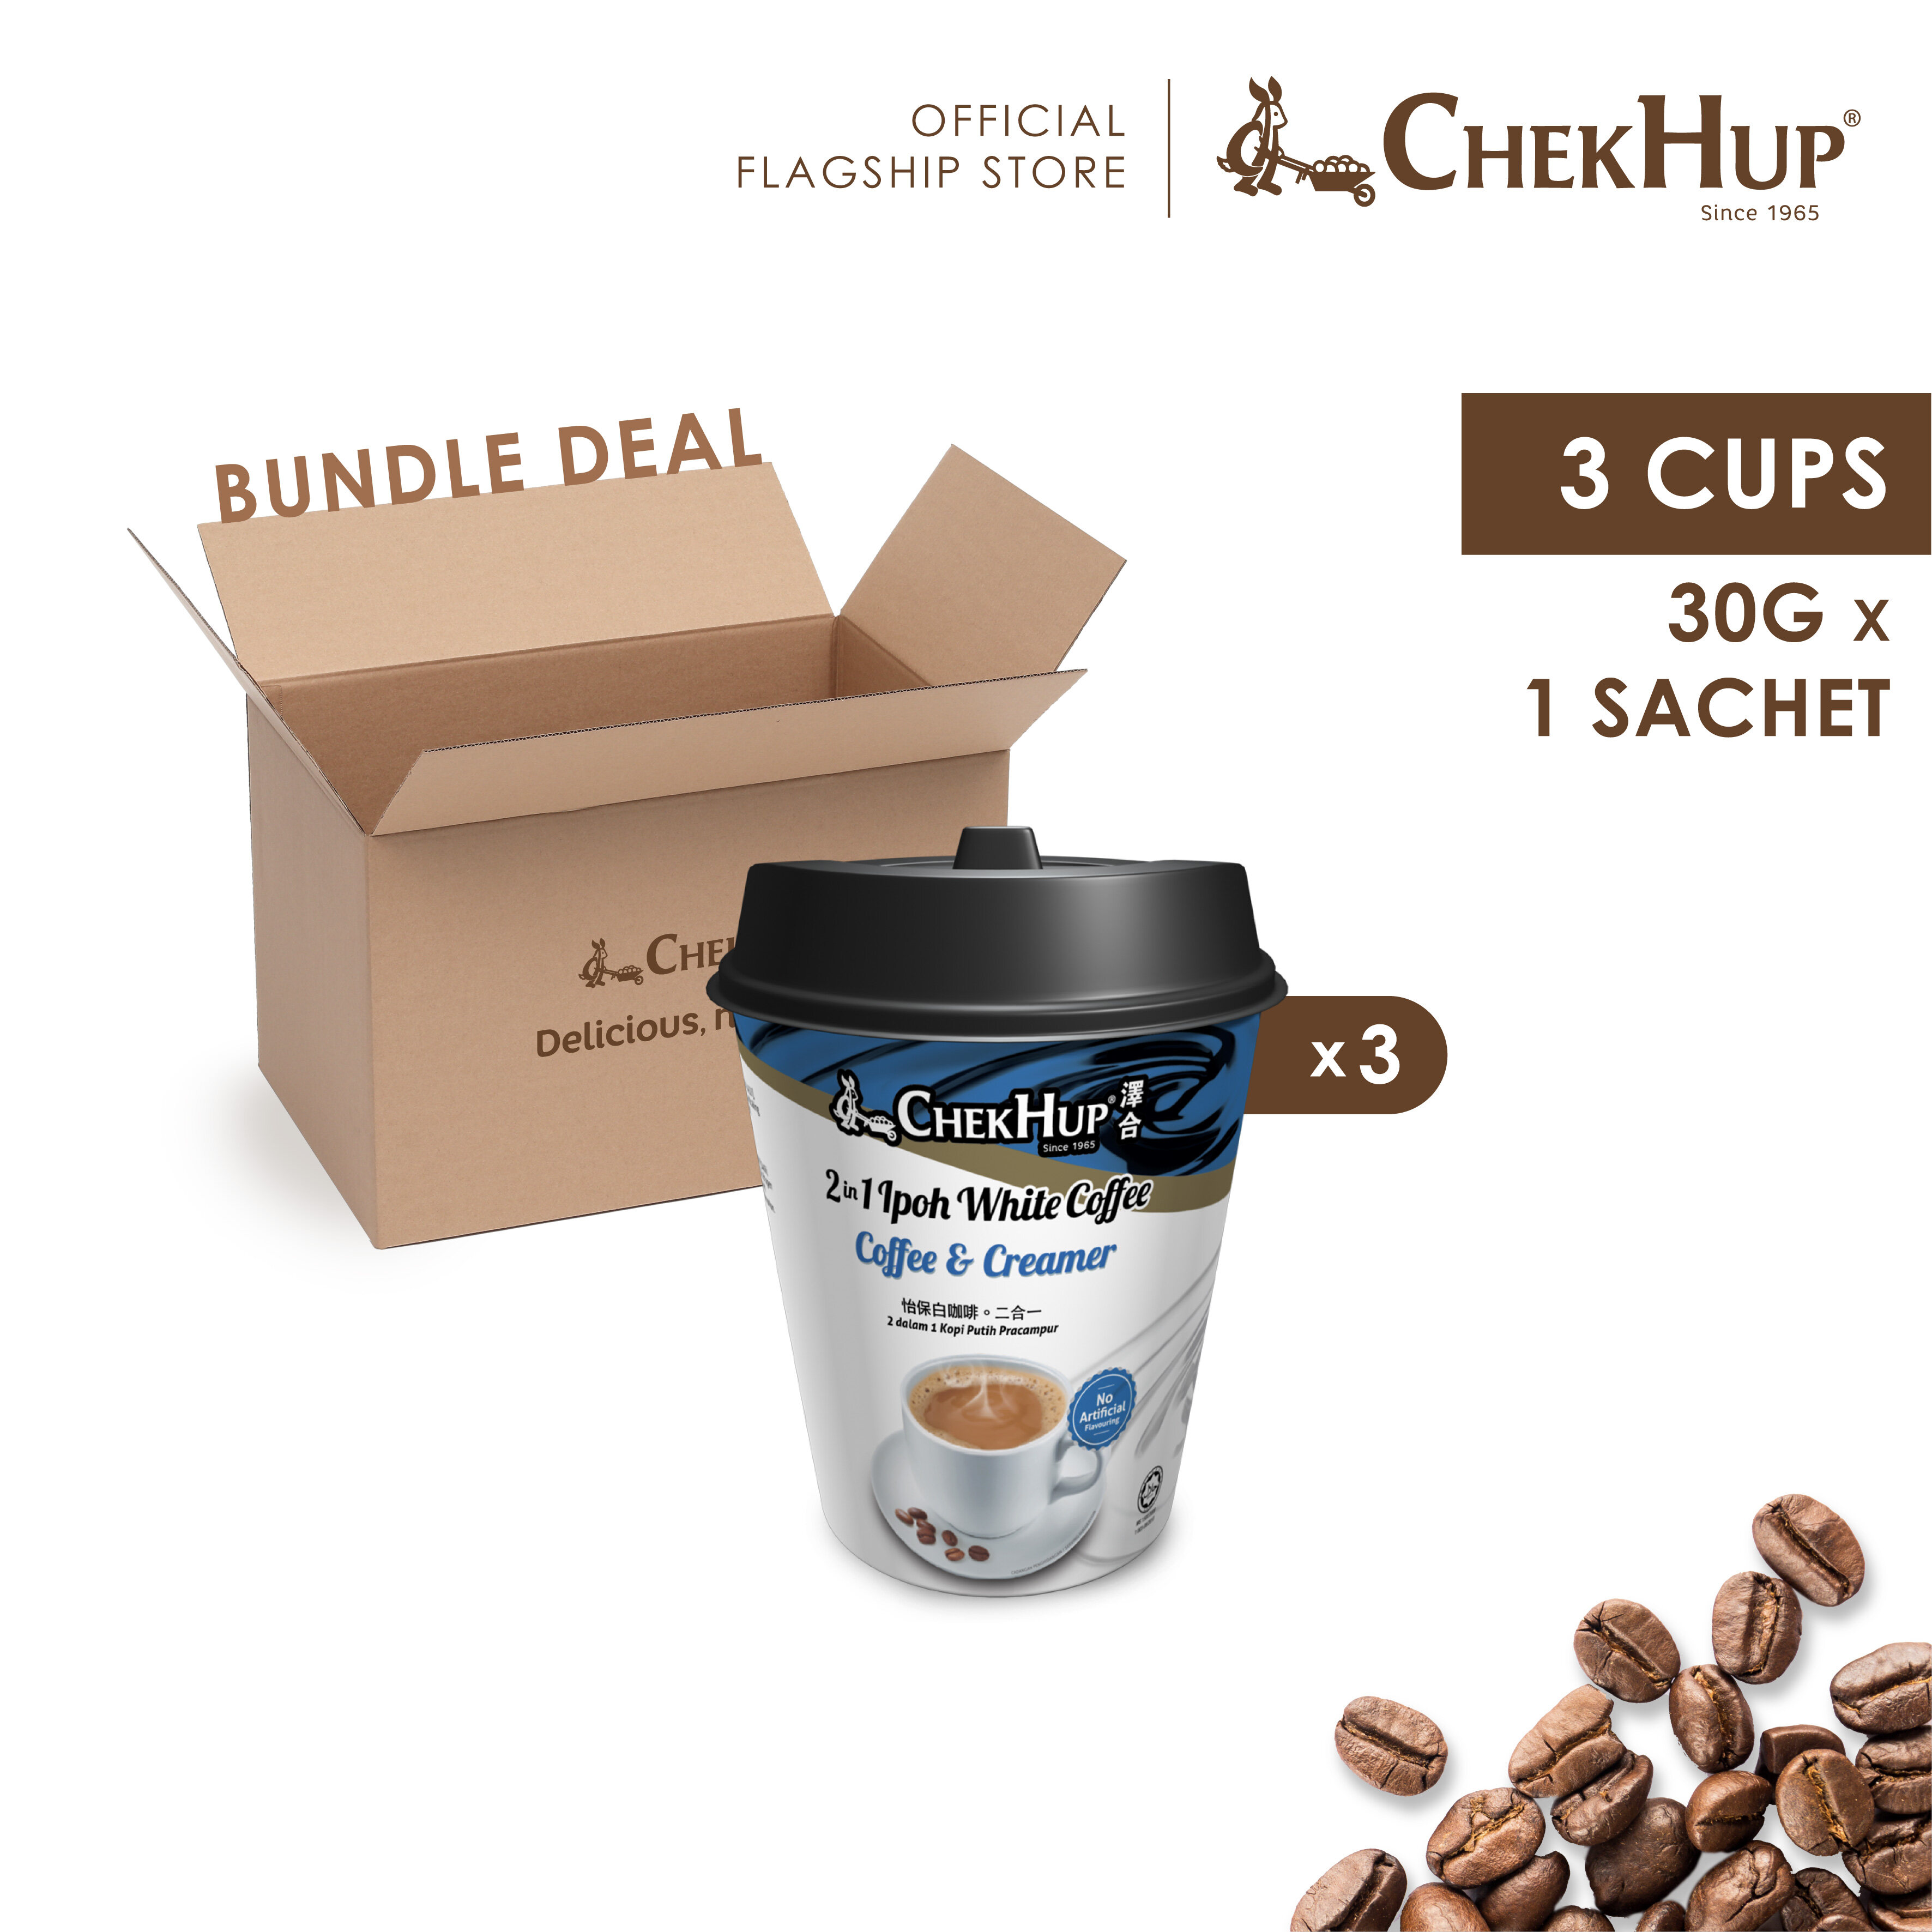 Chek Hup 2 in 1 Ipoh White Coffee & Creamer (30g x 3 Cups)  [Bundle of 3]